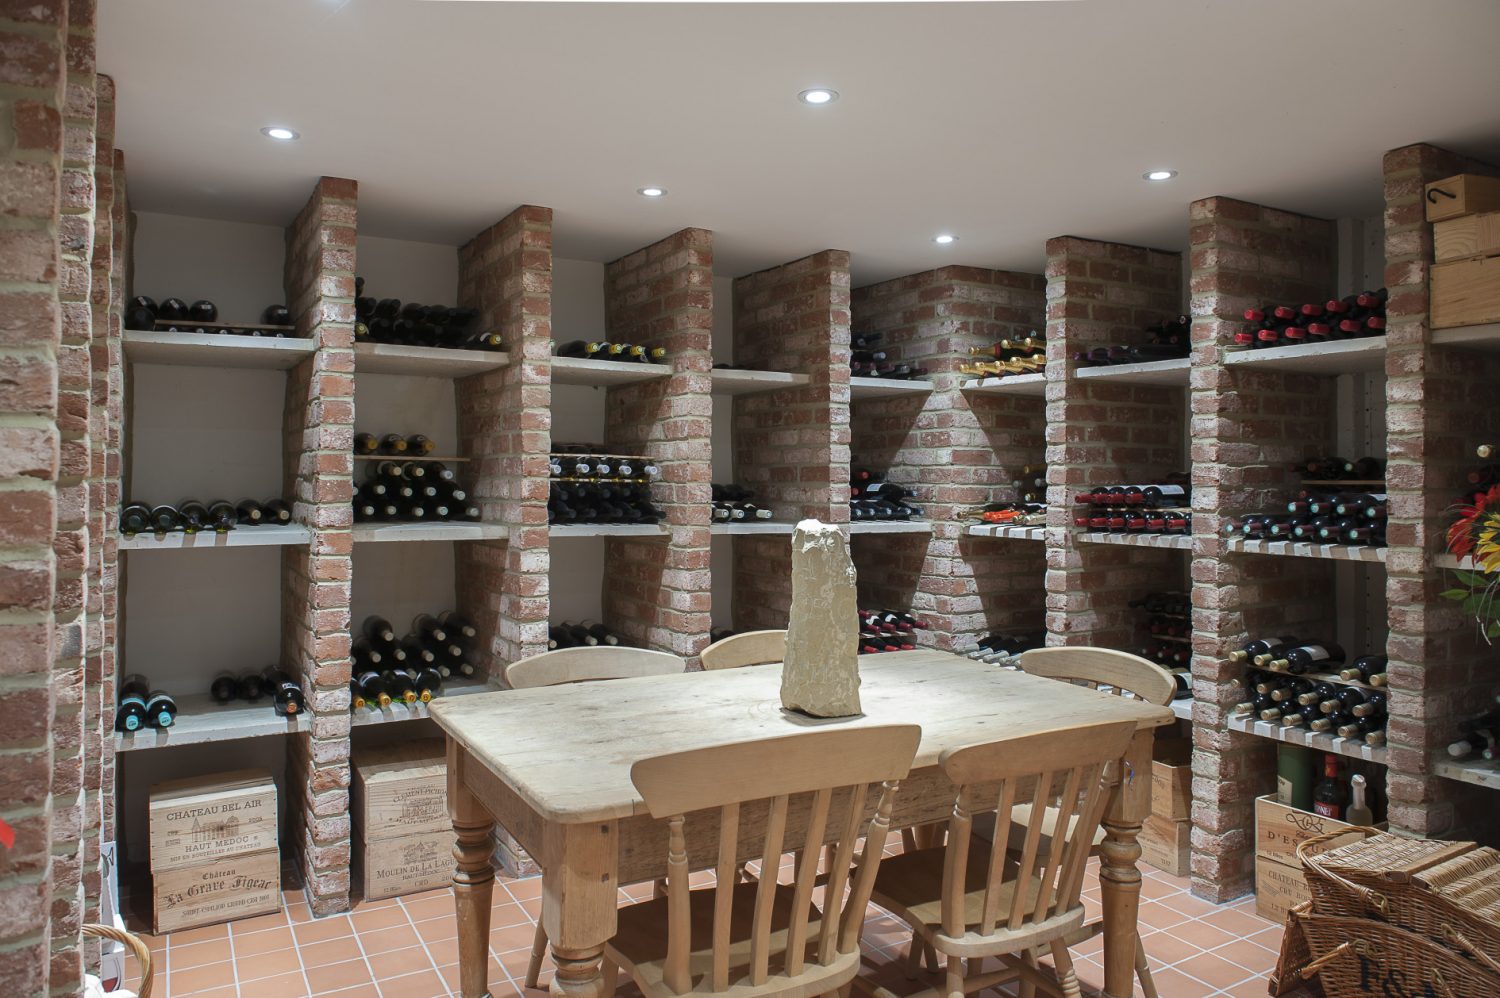 Tucked away down a discreet staircase at the back of the house, there is every wine-lover’s dream; a vast, cool cellar built from brick and stone, where Julian keeps a prized collection of wine. A rustic table is the perfect spot for Julian and fellow wine-lovers to sample favourite wines